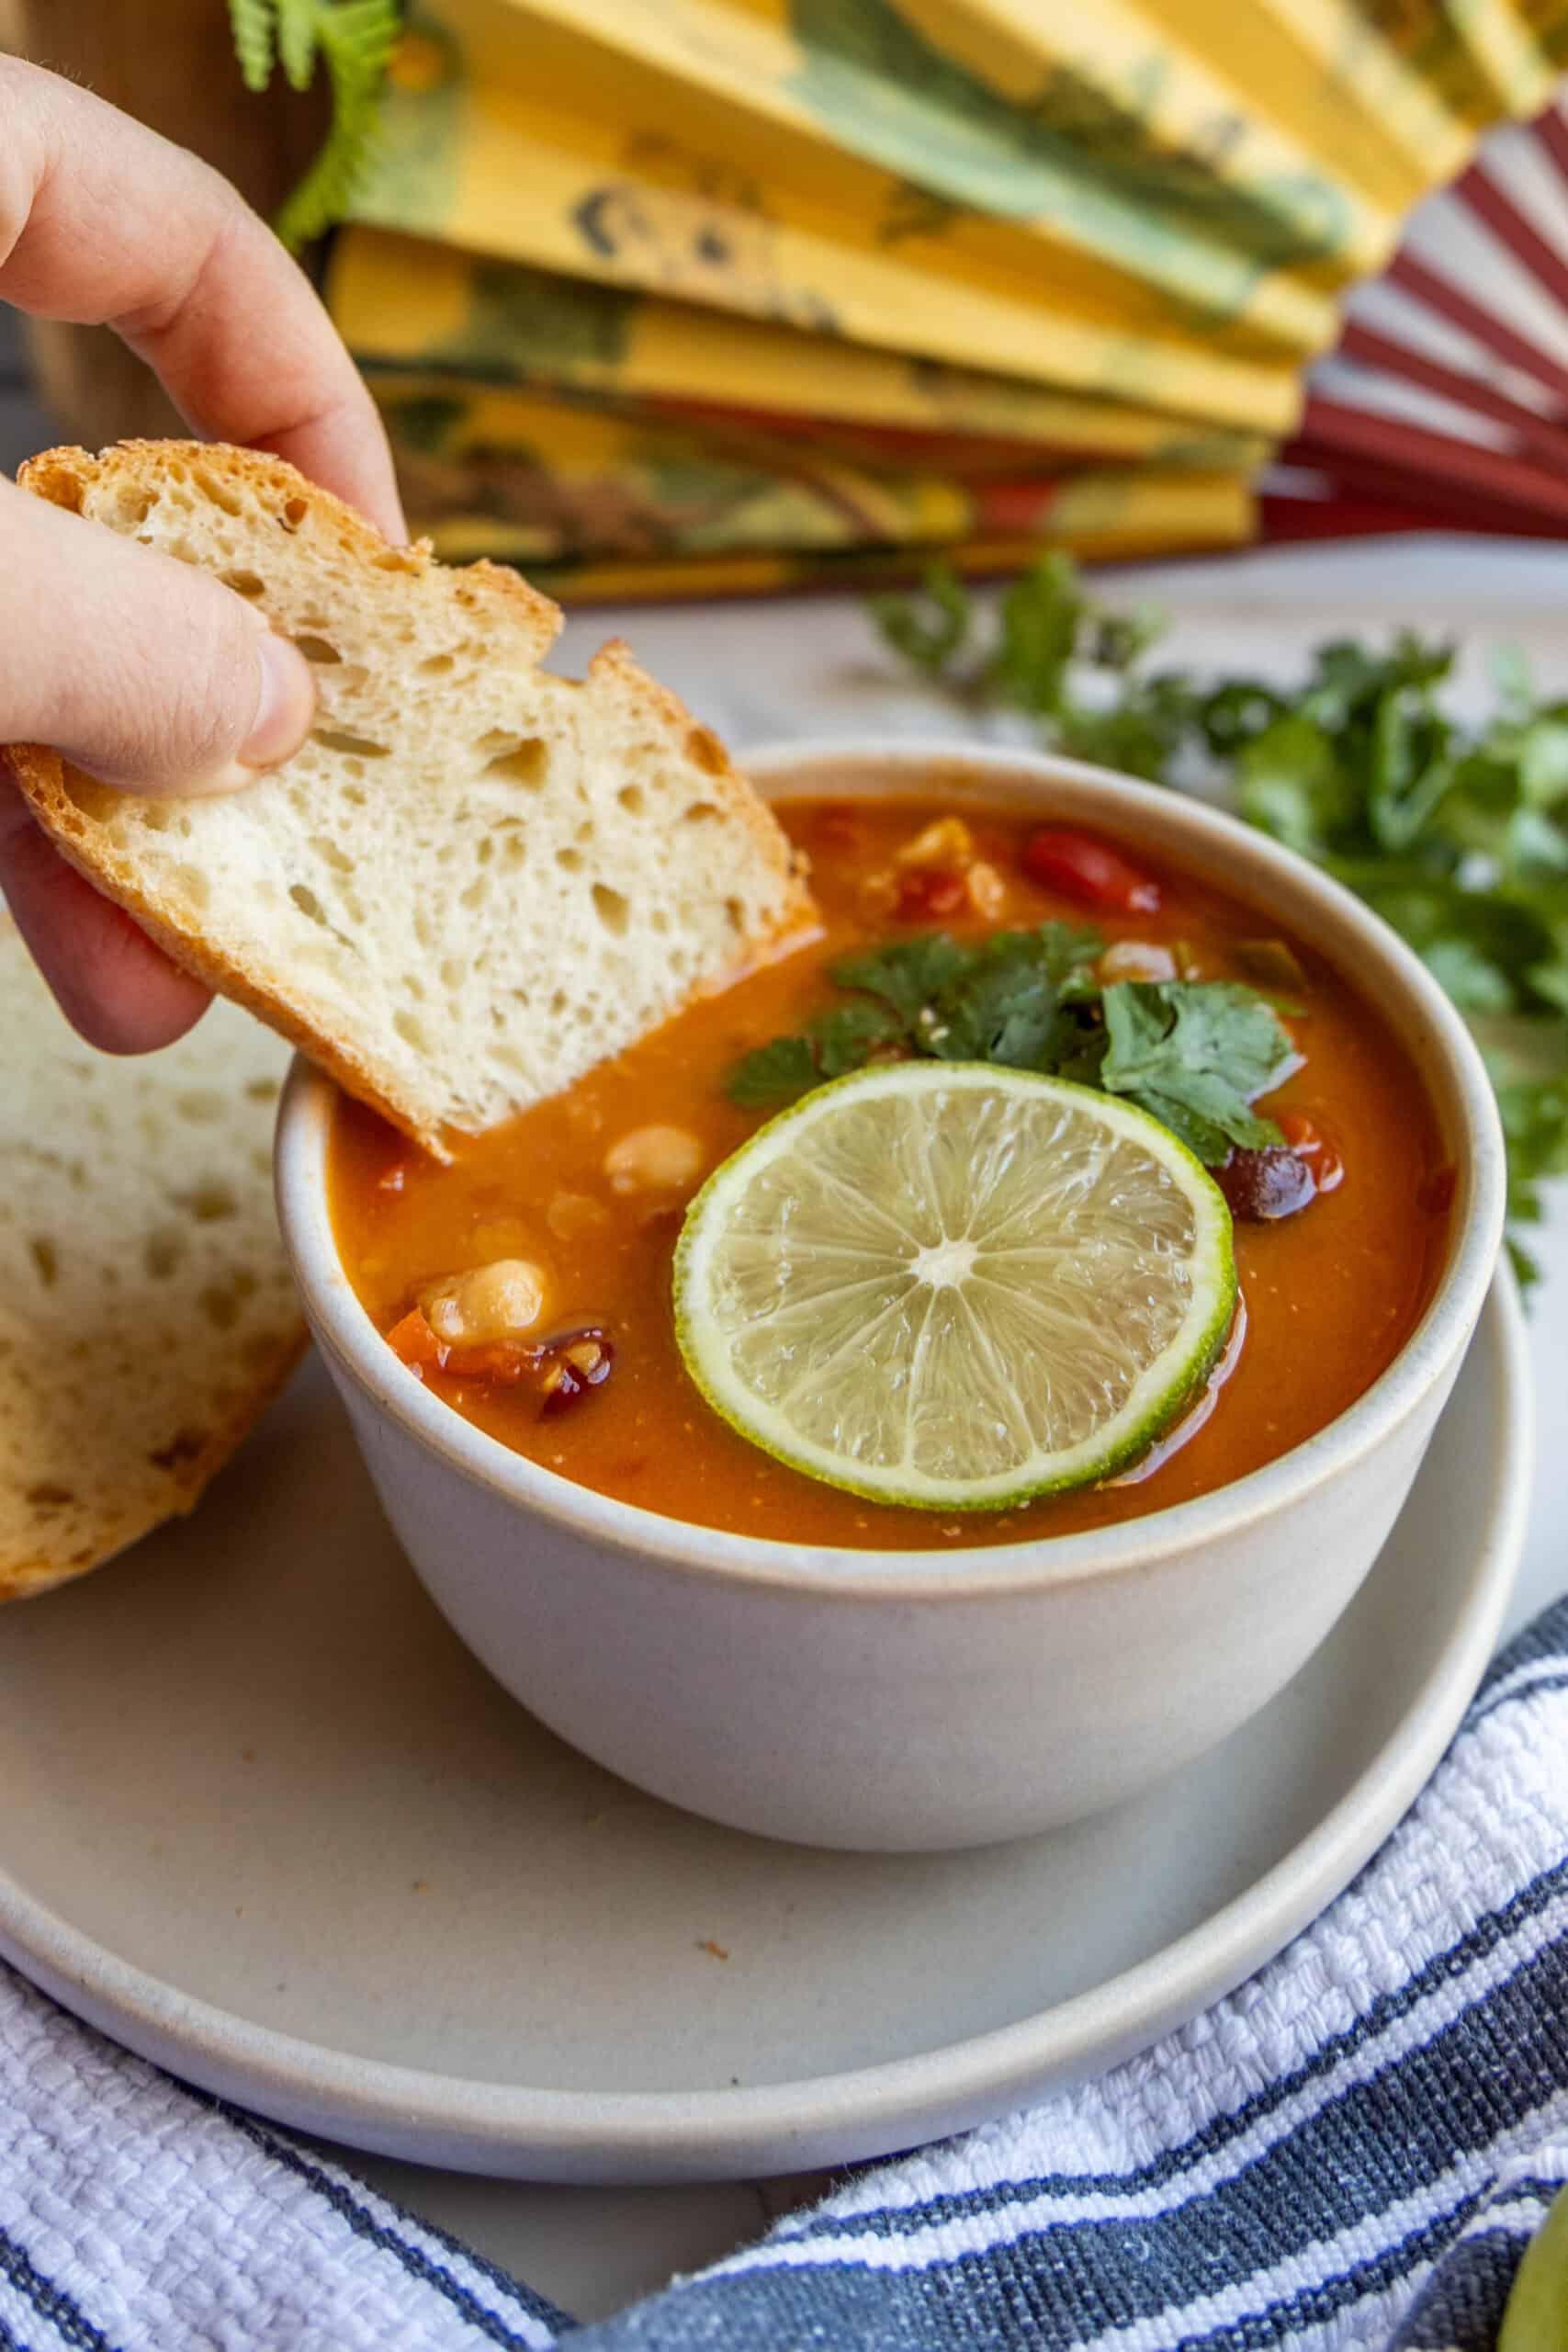 A person is dipping bread into a bowl of soup with a Thai chili.